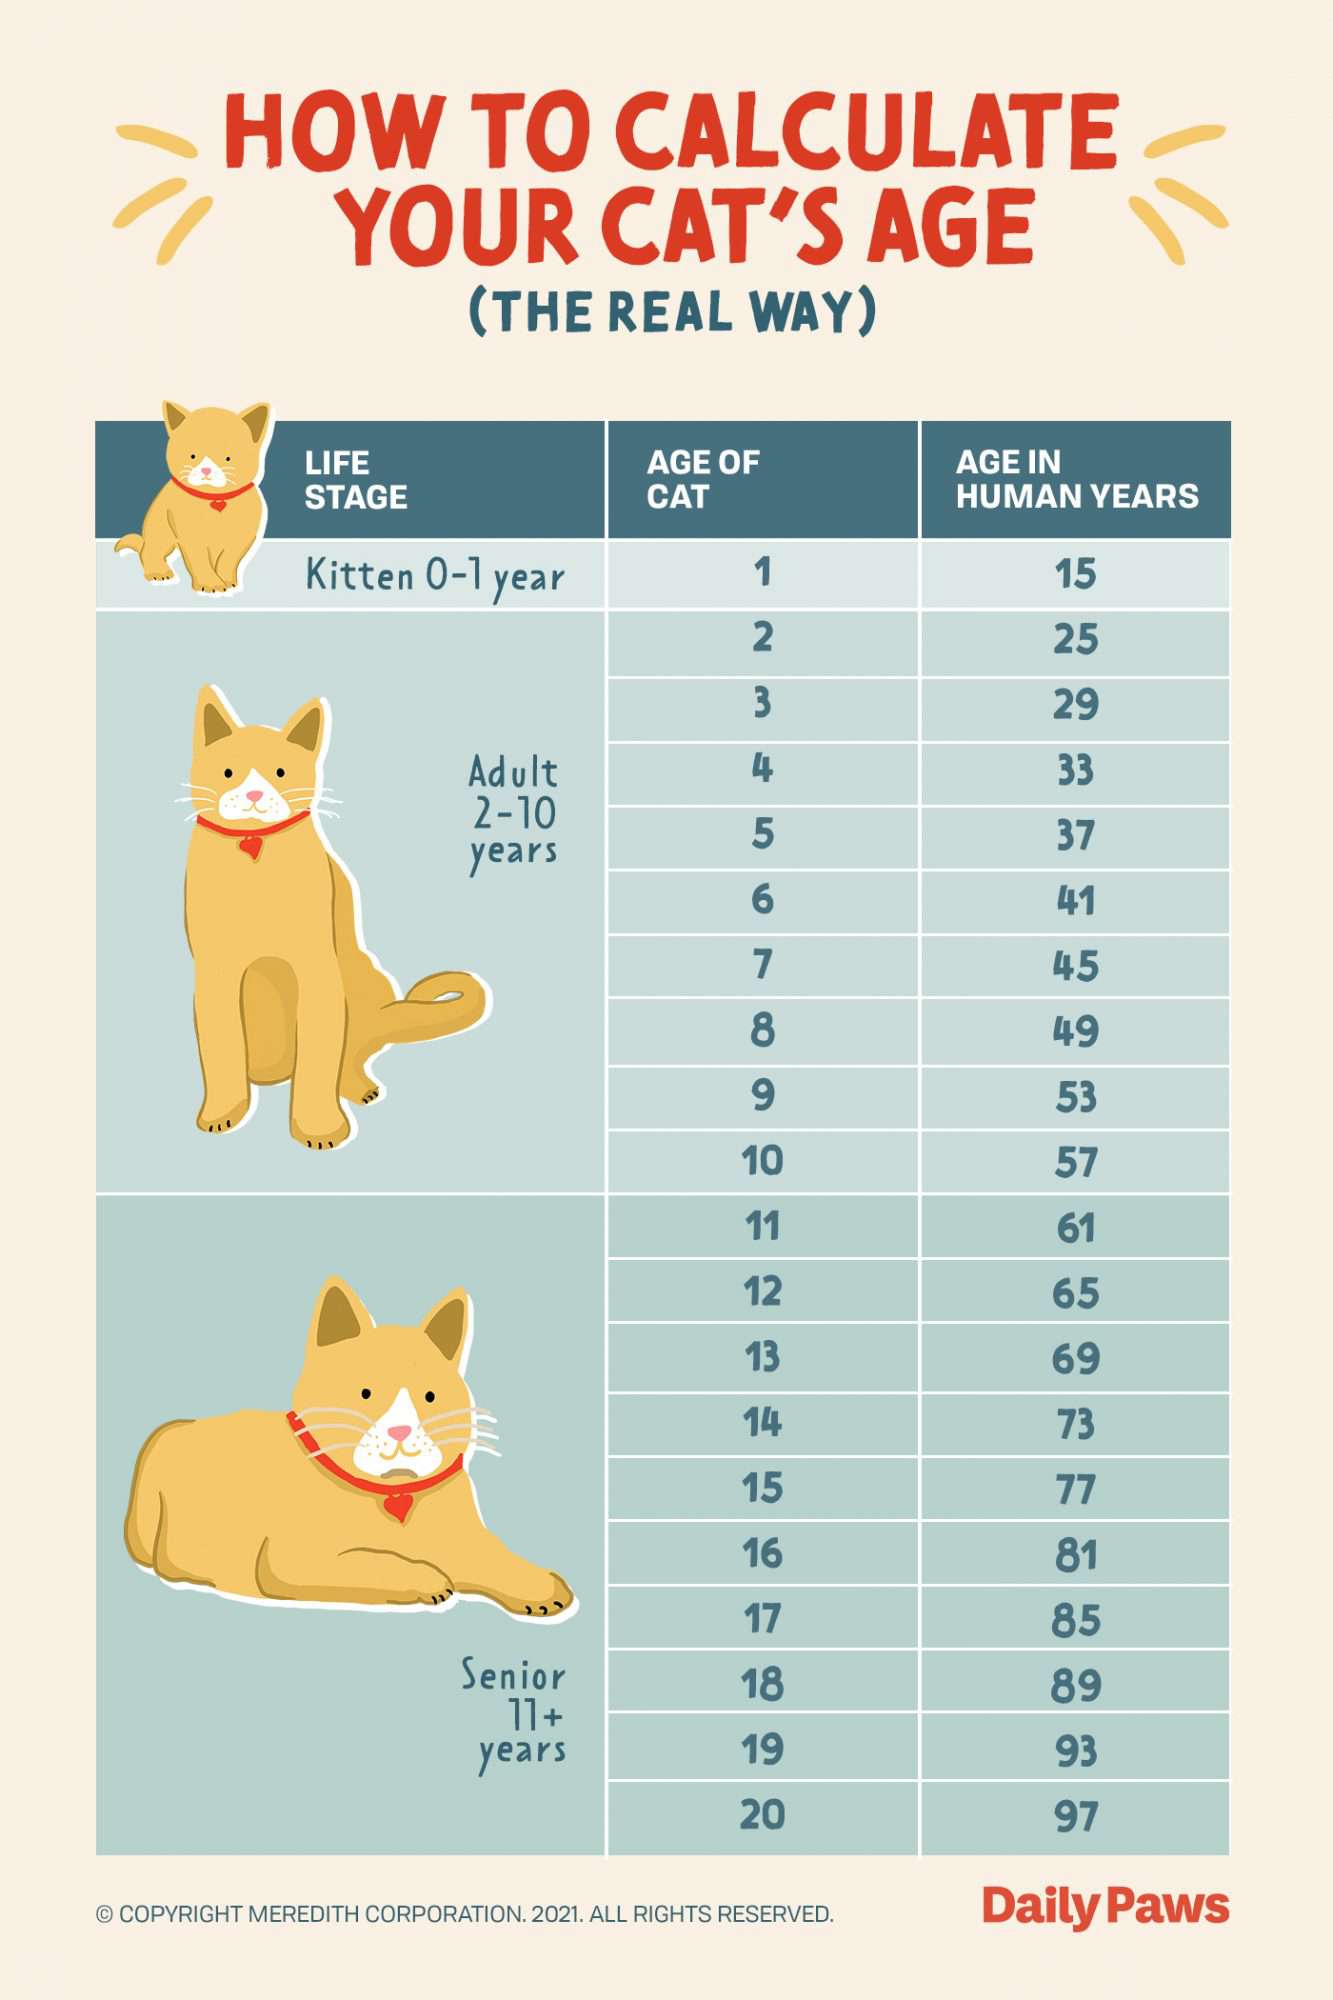 The Real Way to Calculate Your Cat's Age in Human Years | Daily Paws